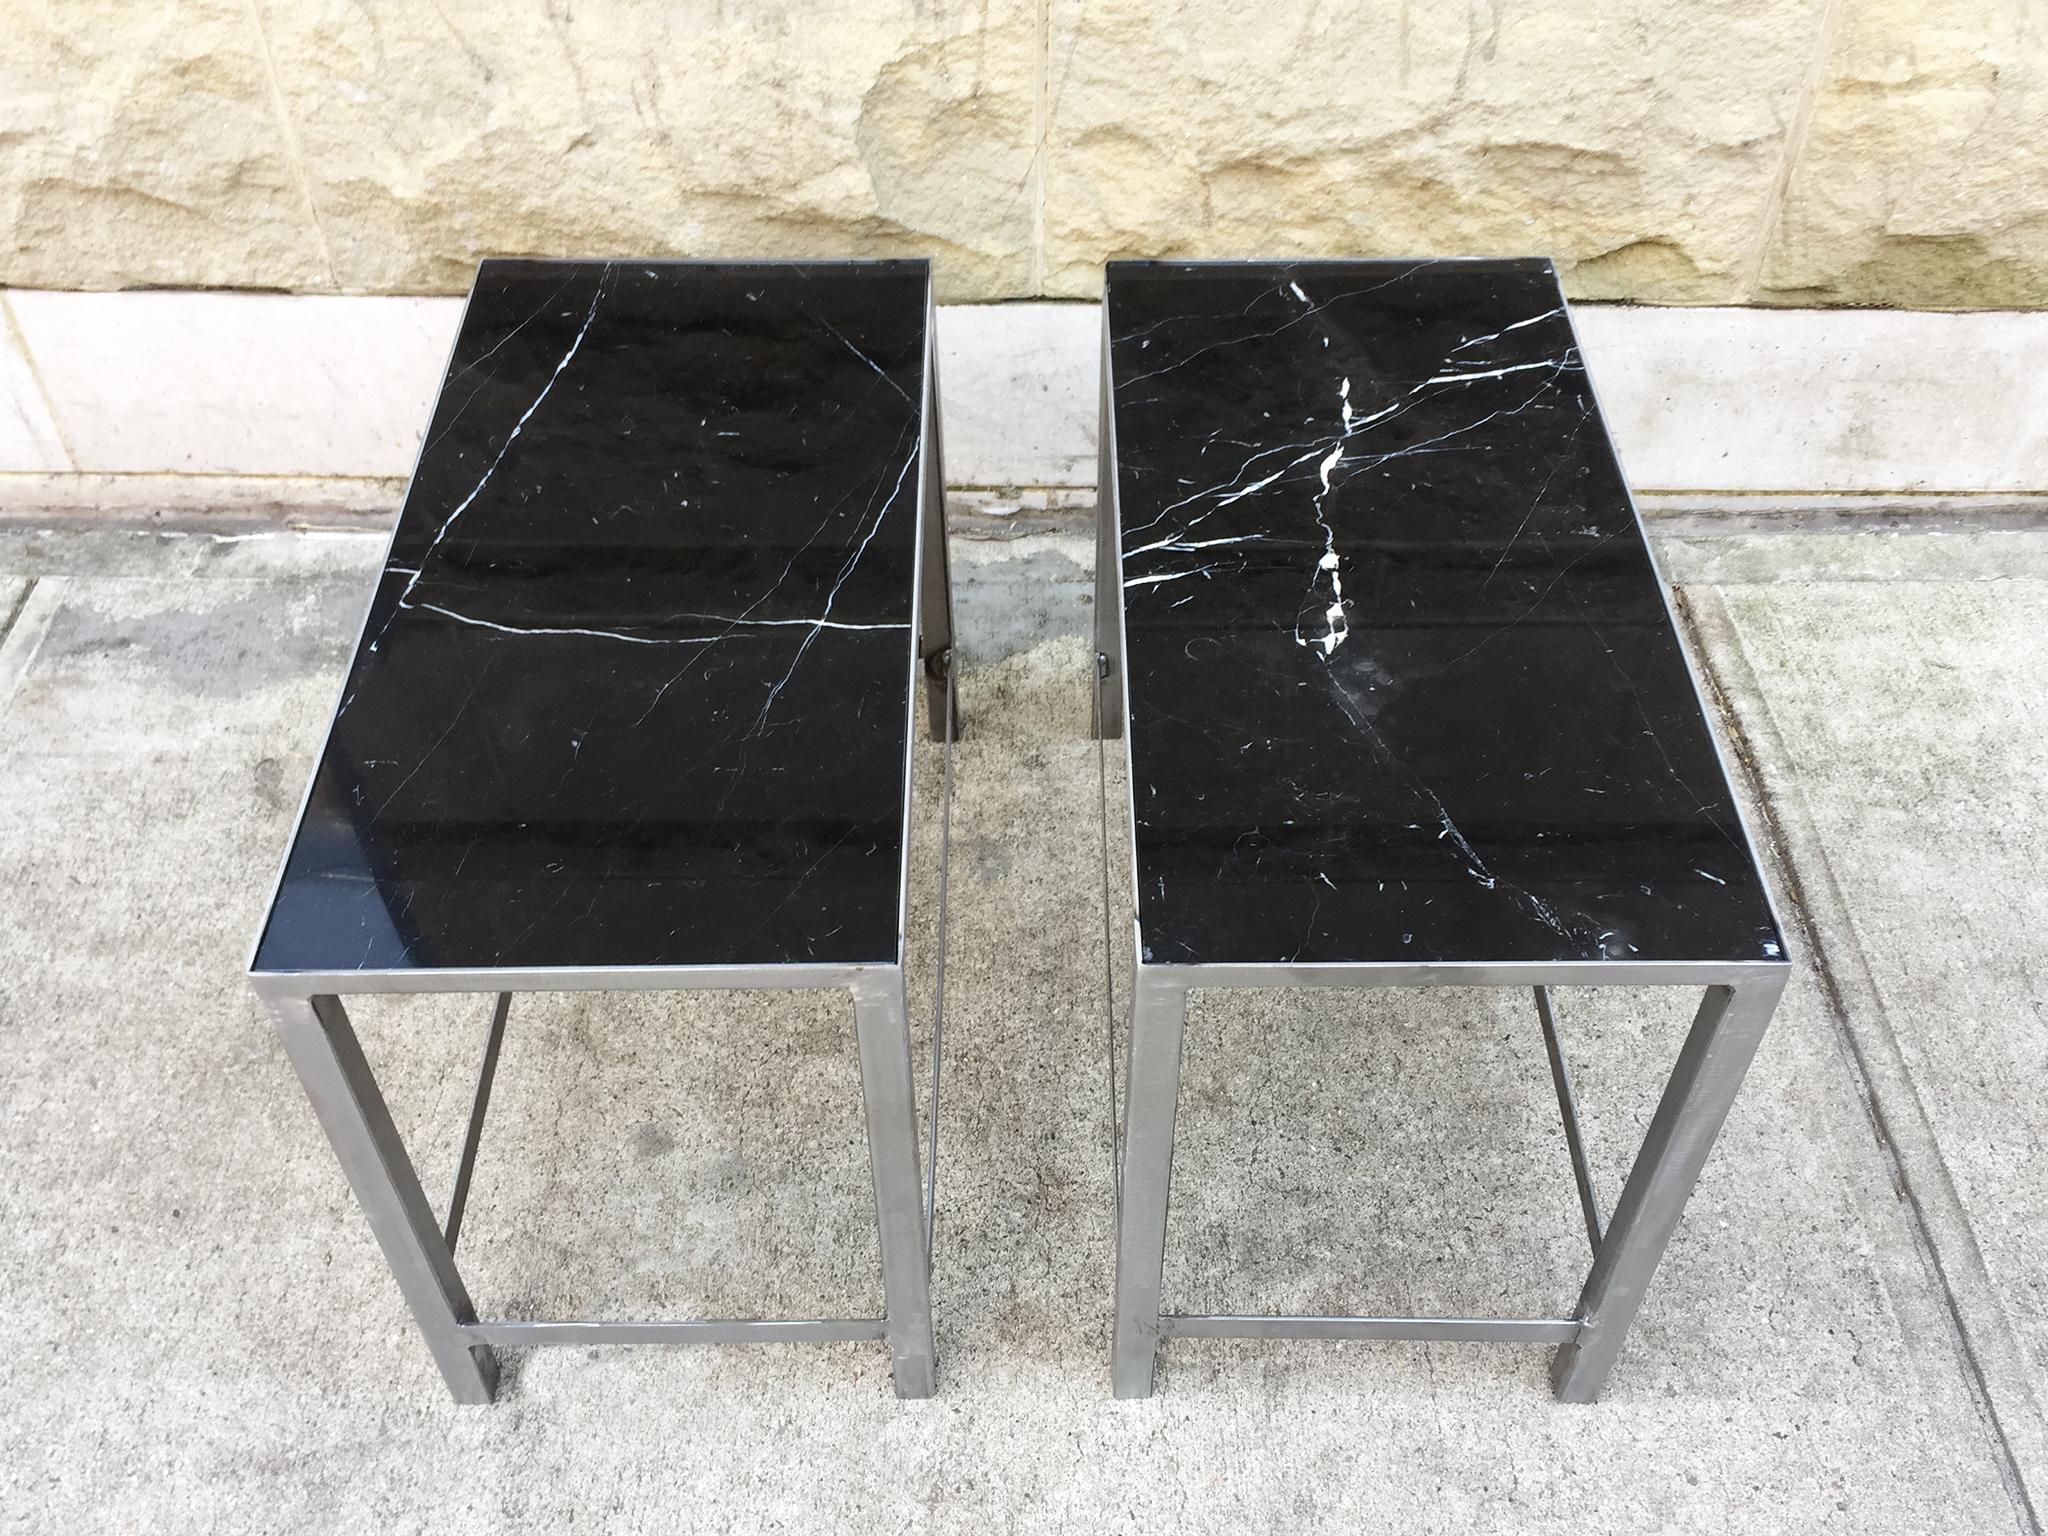 These remarkable custom end tables are newly handcrafted. They are comprised of black marble slabs and steel bases. The bases are soldered with lipped tops where the marble slabs fit securely, while the table's long, square legs are supported with